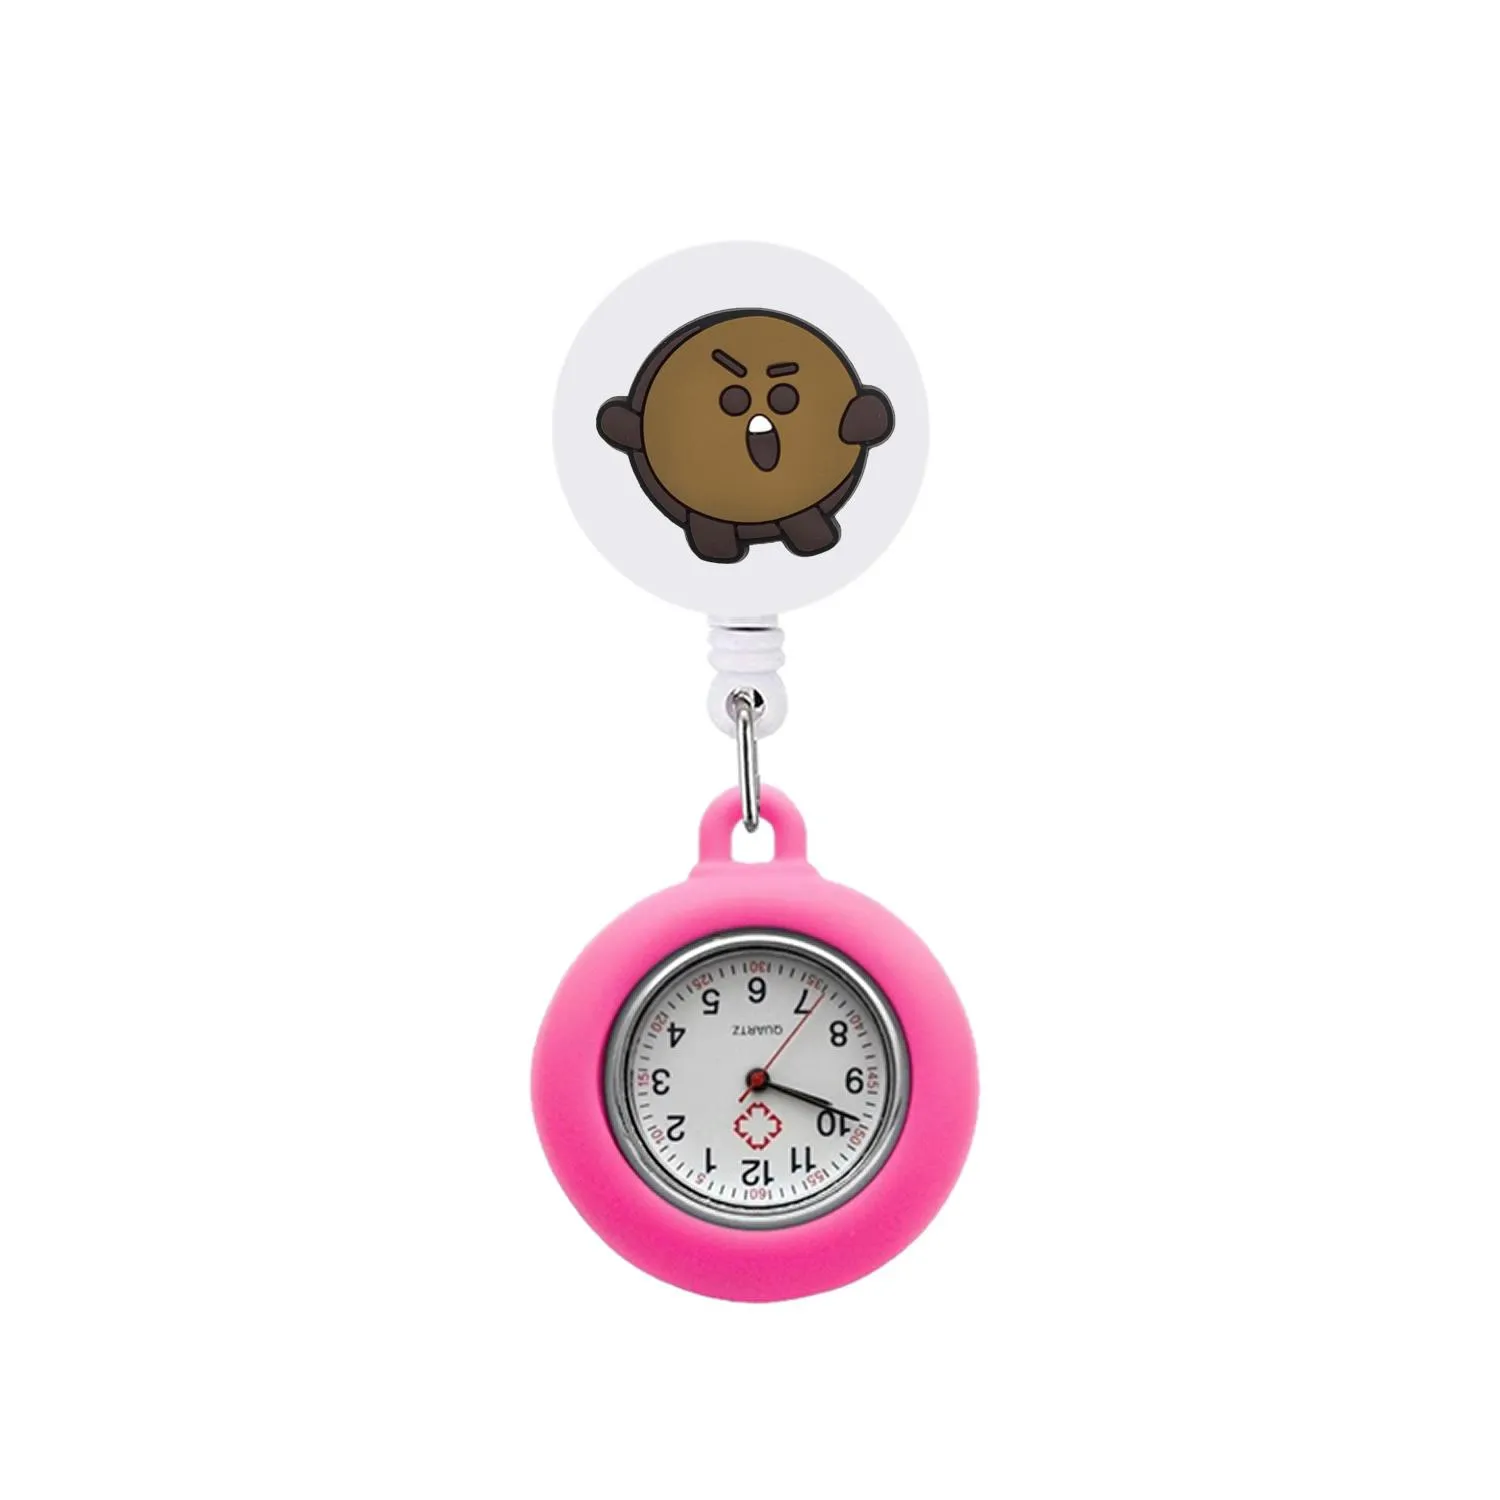 bt21 17 clip pocket watches brooch quartz movement stethoscope retractable fob watch nurse badge accessories with second hand lapel for nurses doctors clip-on hanging